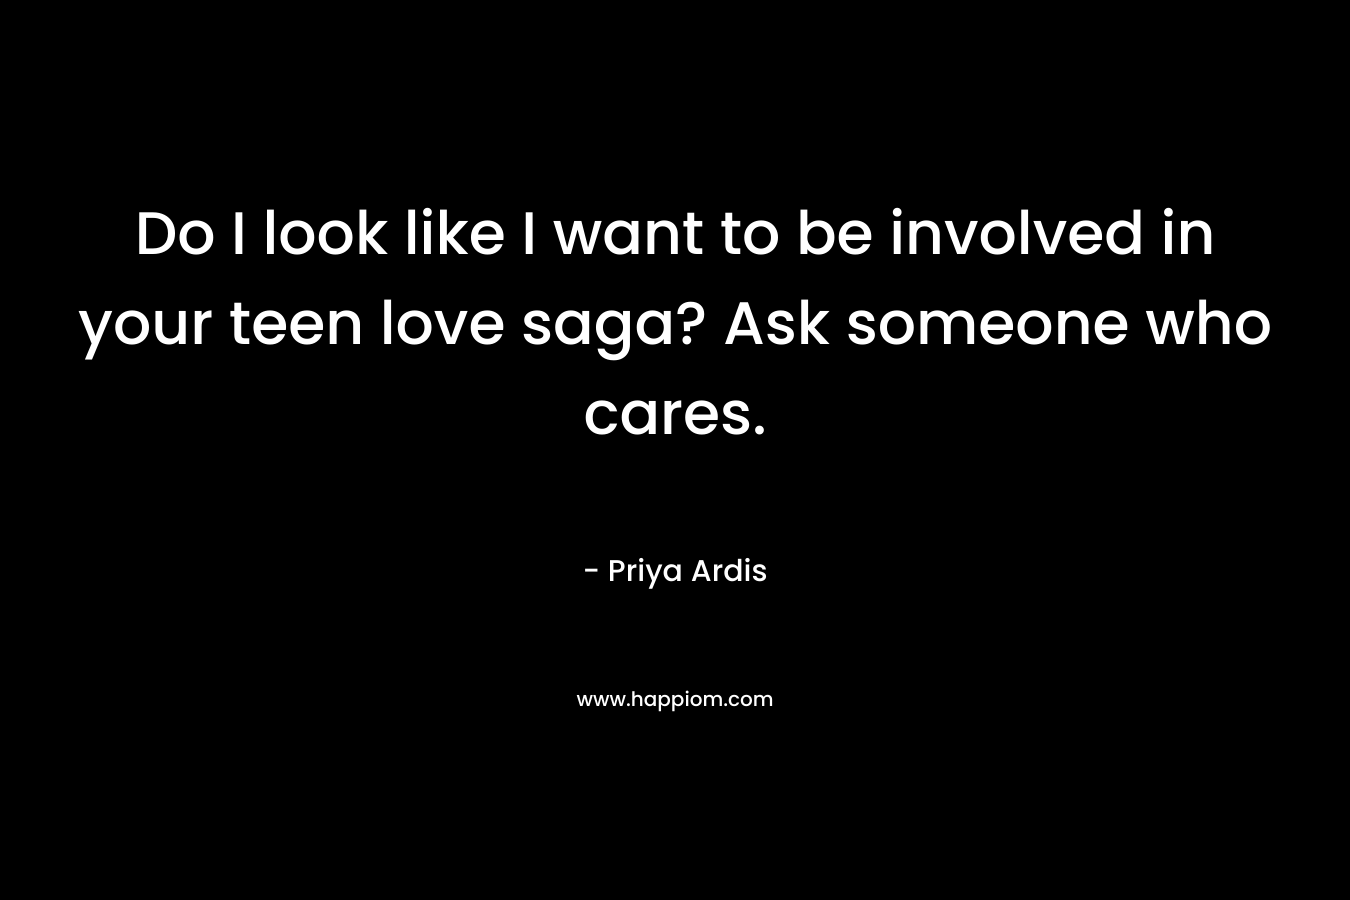 Do I look like I want to be involved in your teen love saga? Ask someone who cares. – Priya Ardis